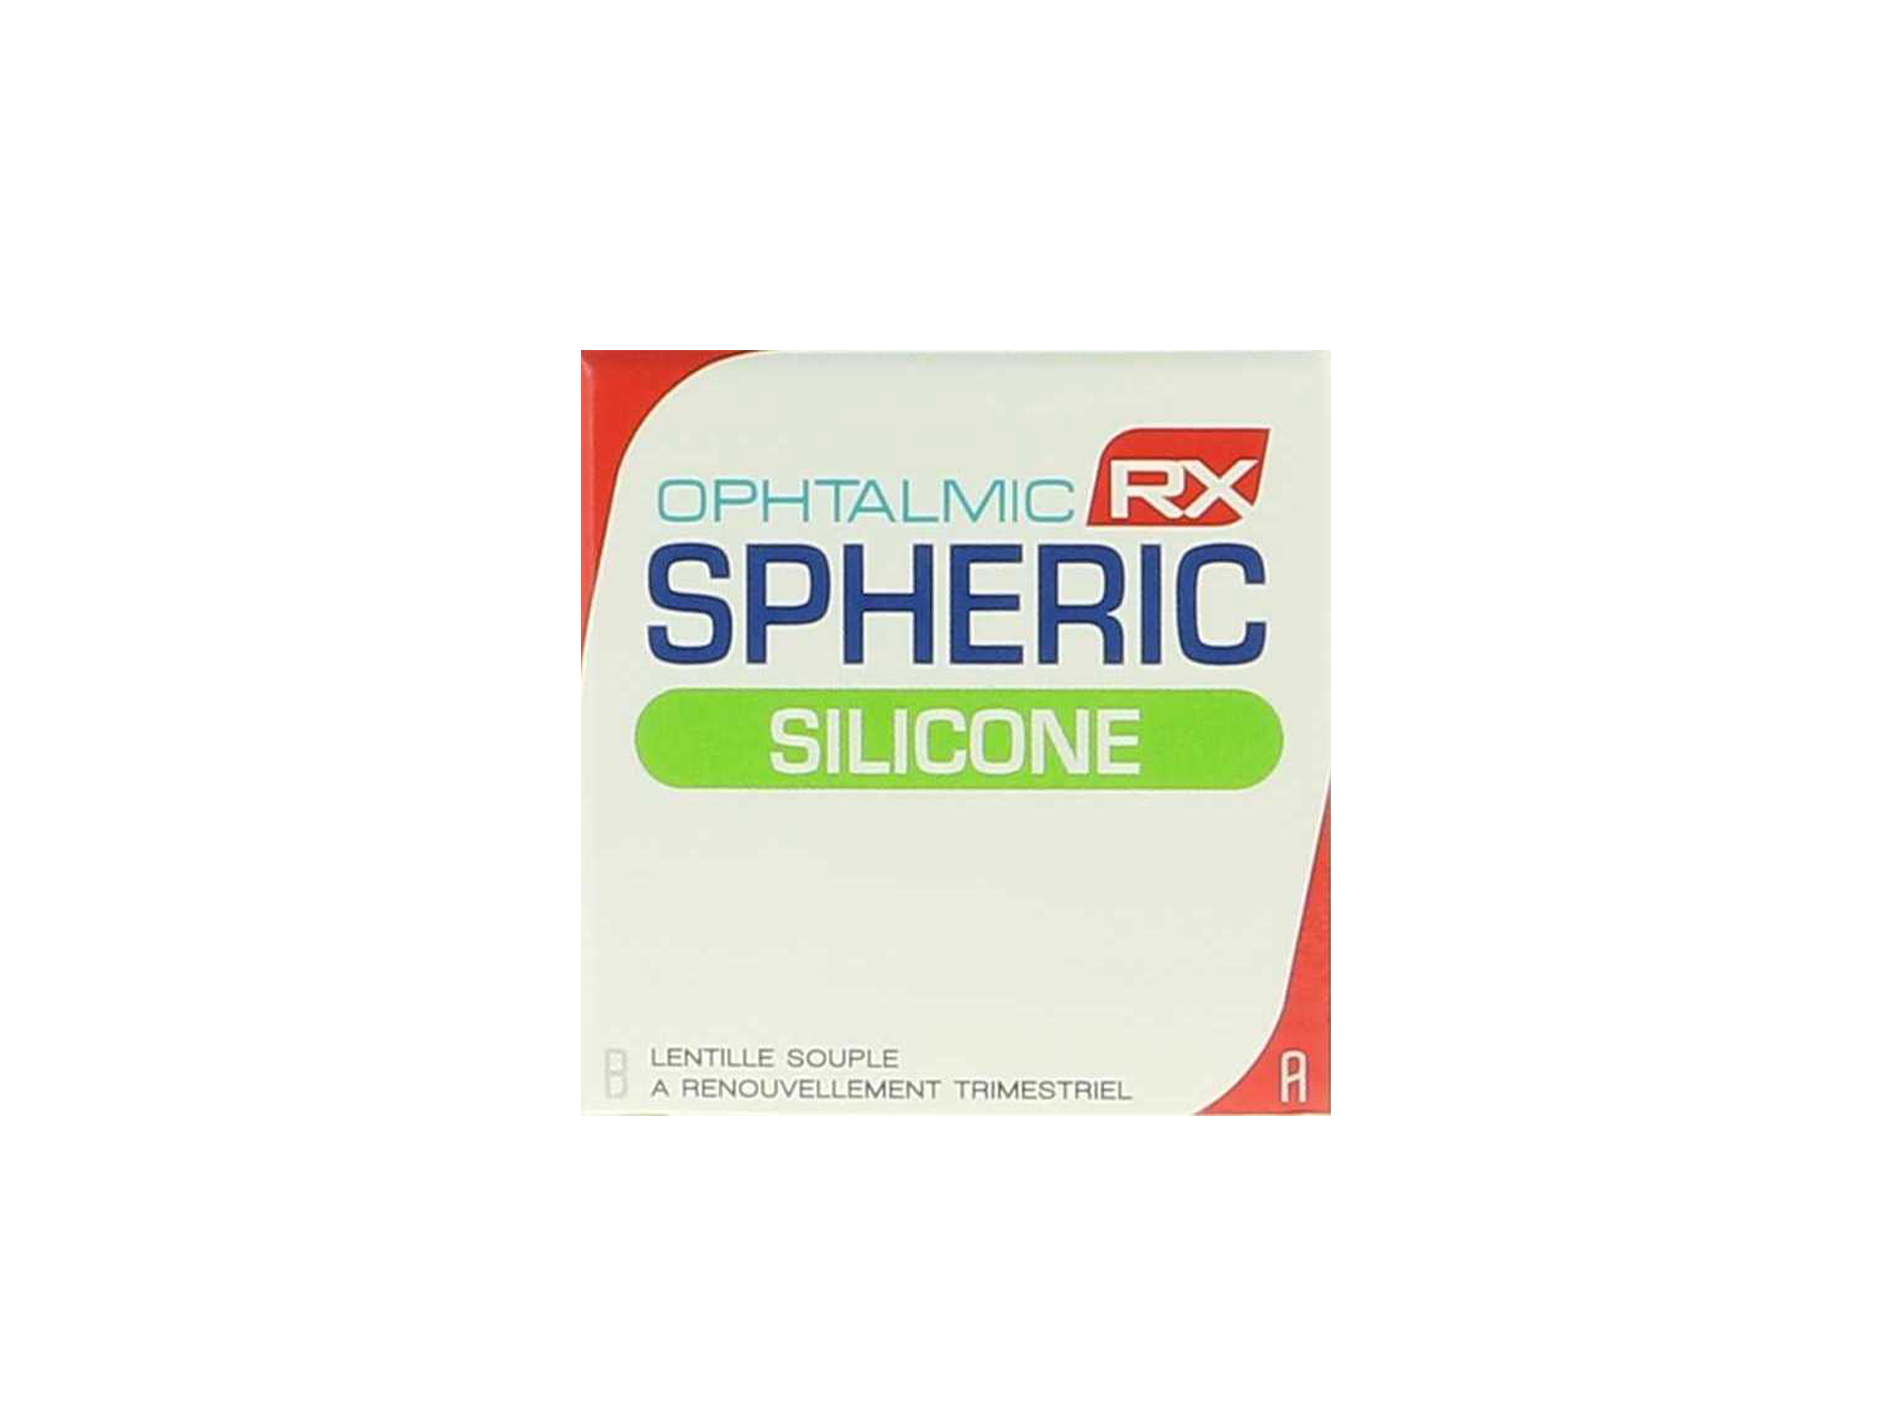 OPHTALMIC RX SPHERIC SILICONE